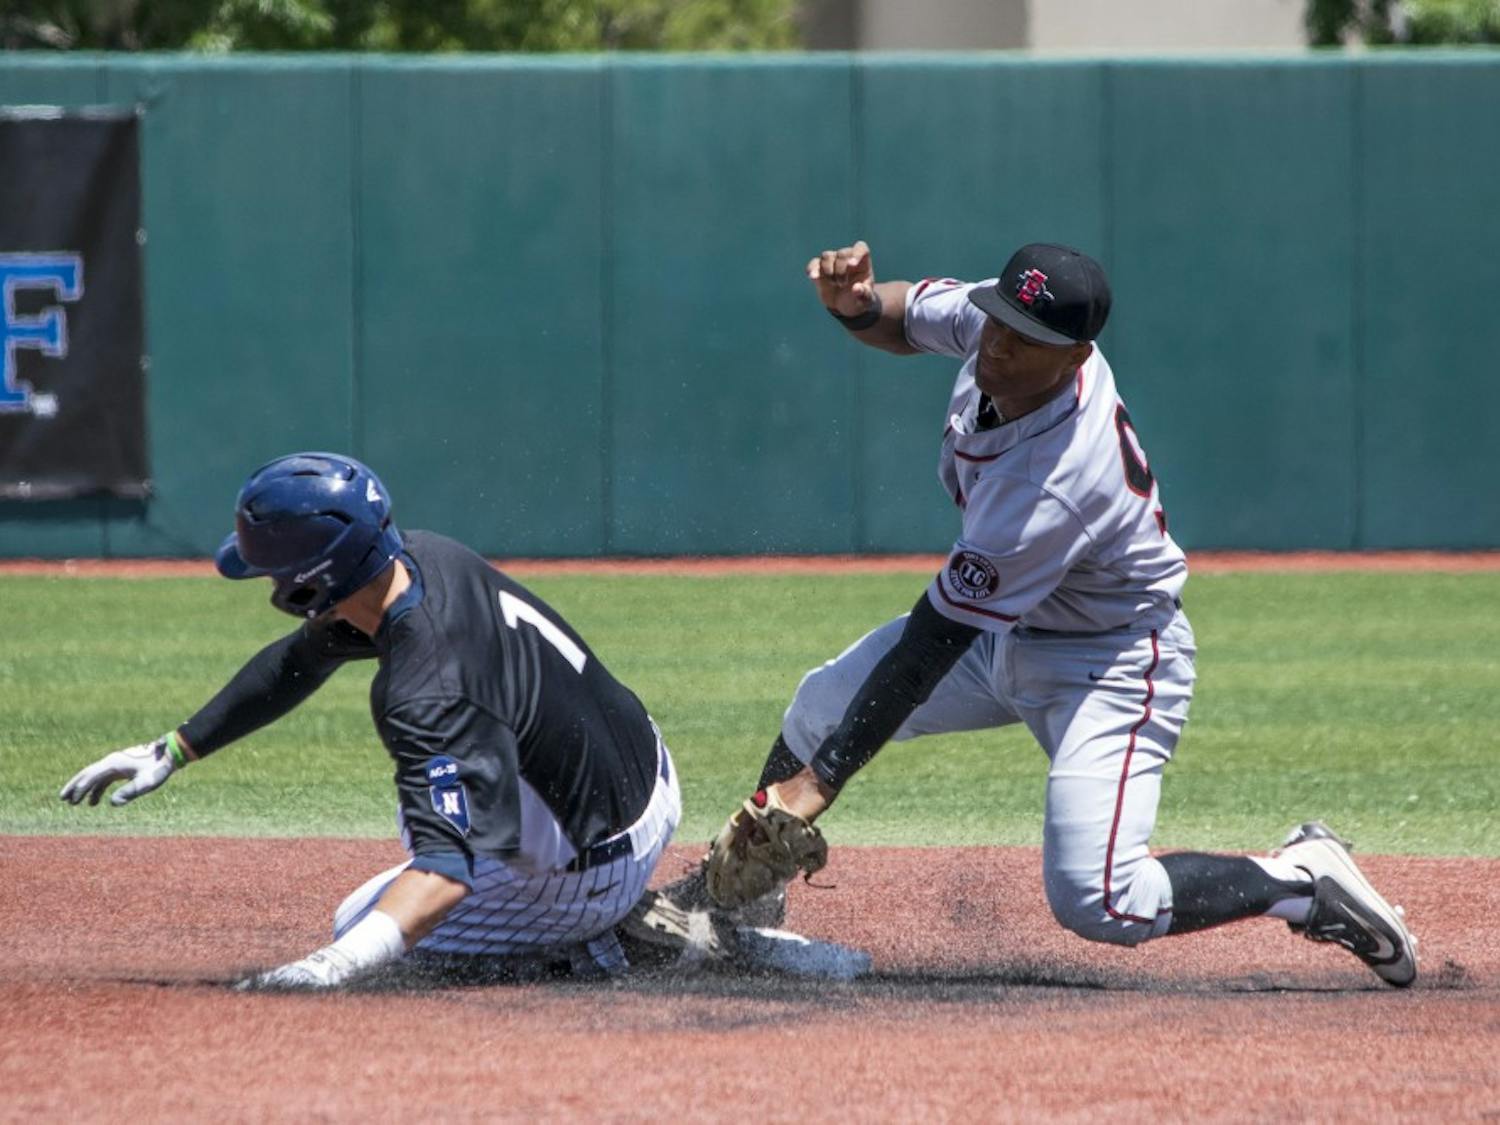 Senior third baseman Bryce Greager slides into second base Friday afternoon at Santa Ana Star Field. Nevada beat San Diego State 5-3 in game seven of the Mountain West Championship.&nbsp;